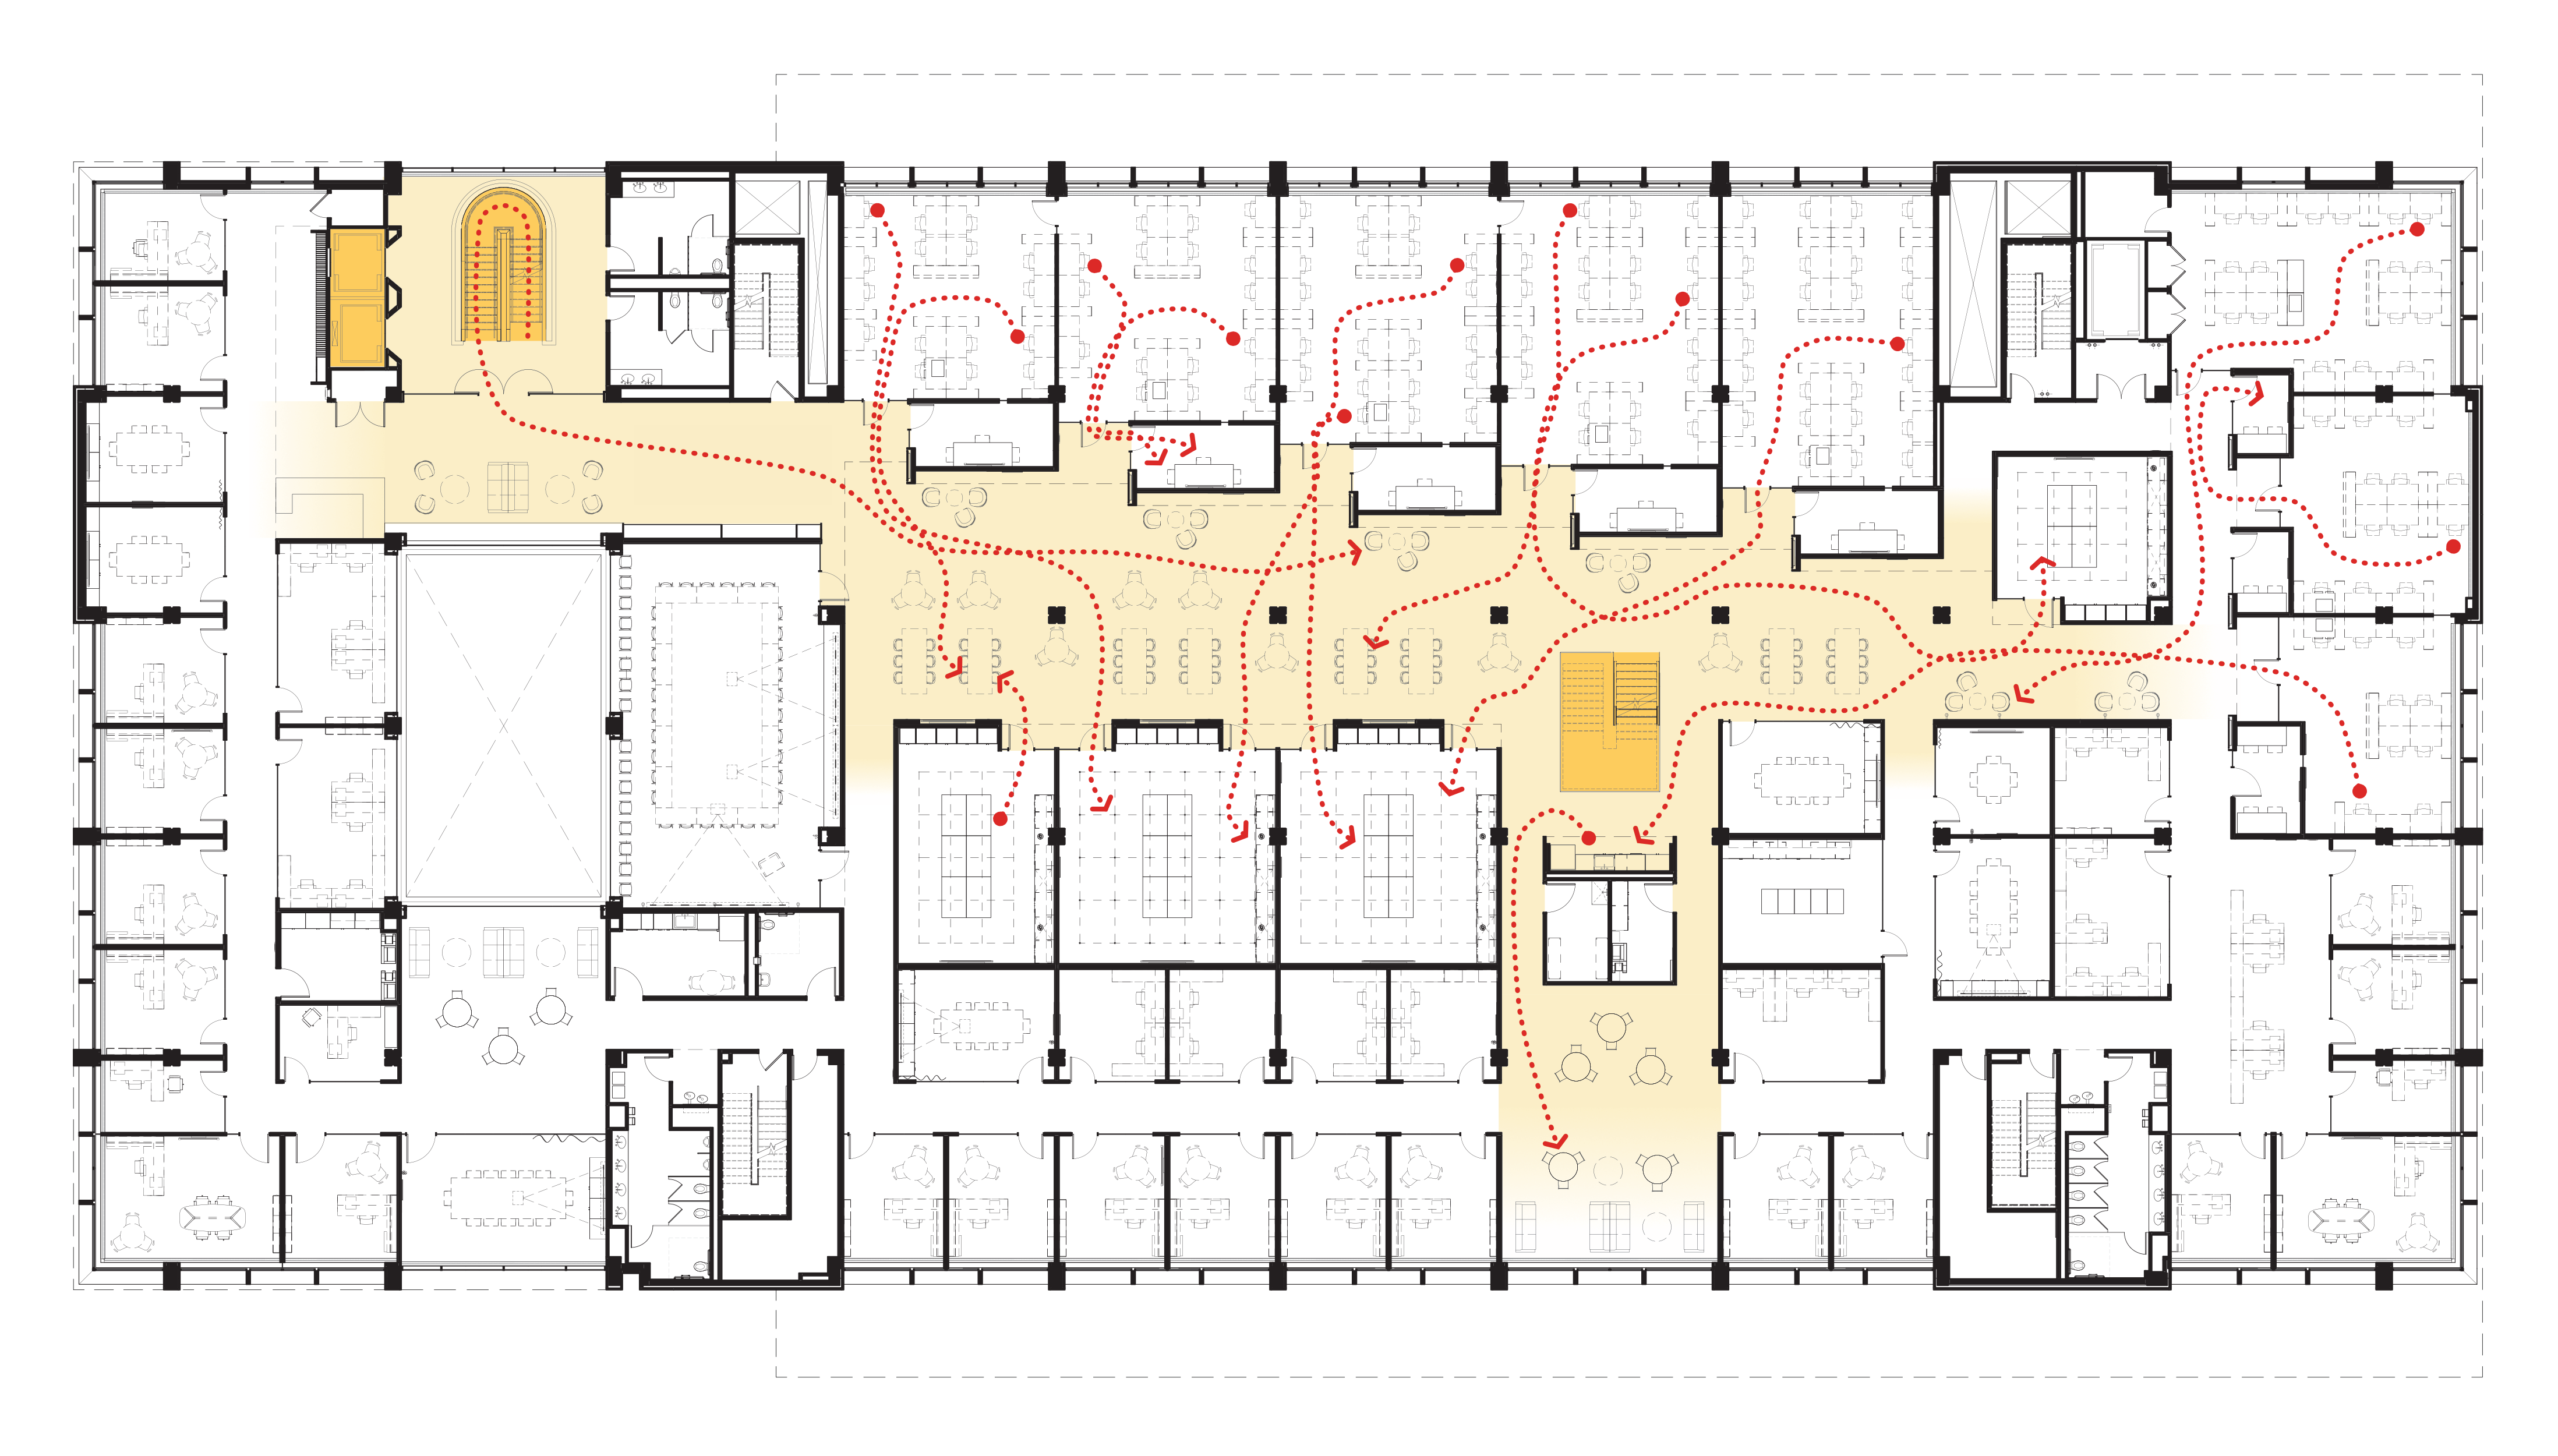 Level 2 floor plan showing how the Commons serves as a condenser of activity among graduate students and undergraduates in the Department of Computer Science